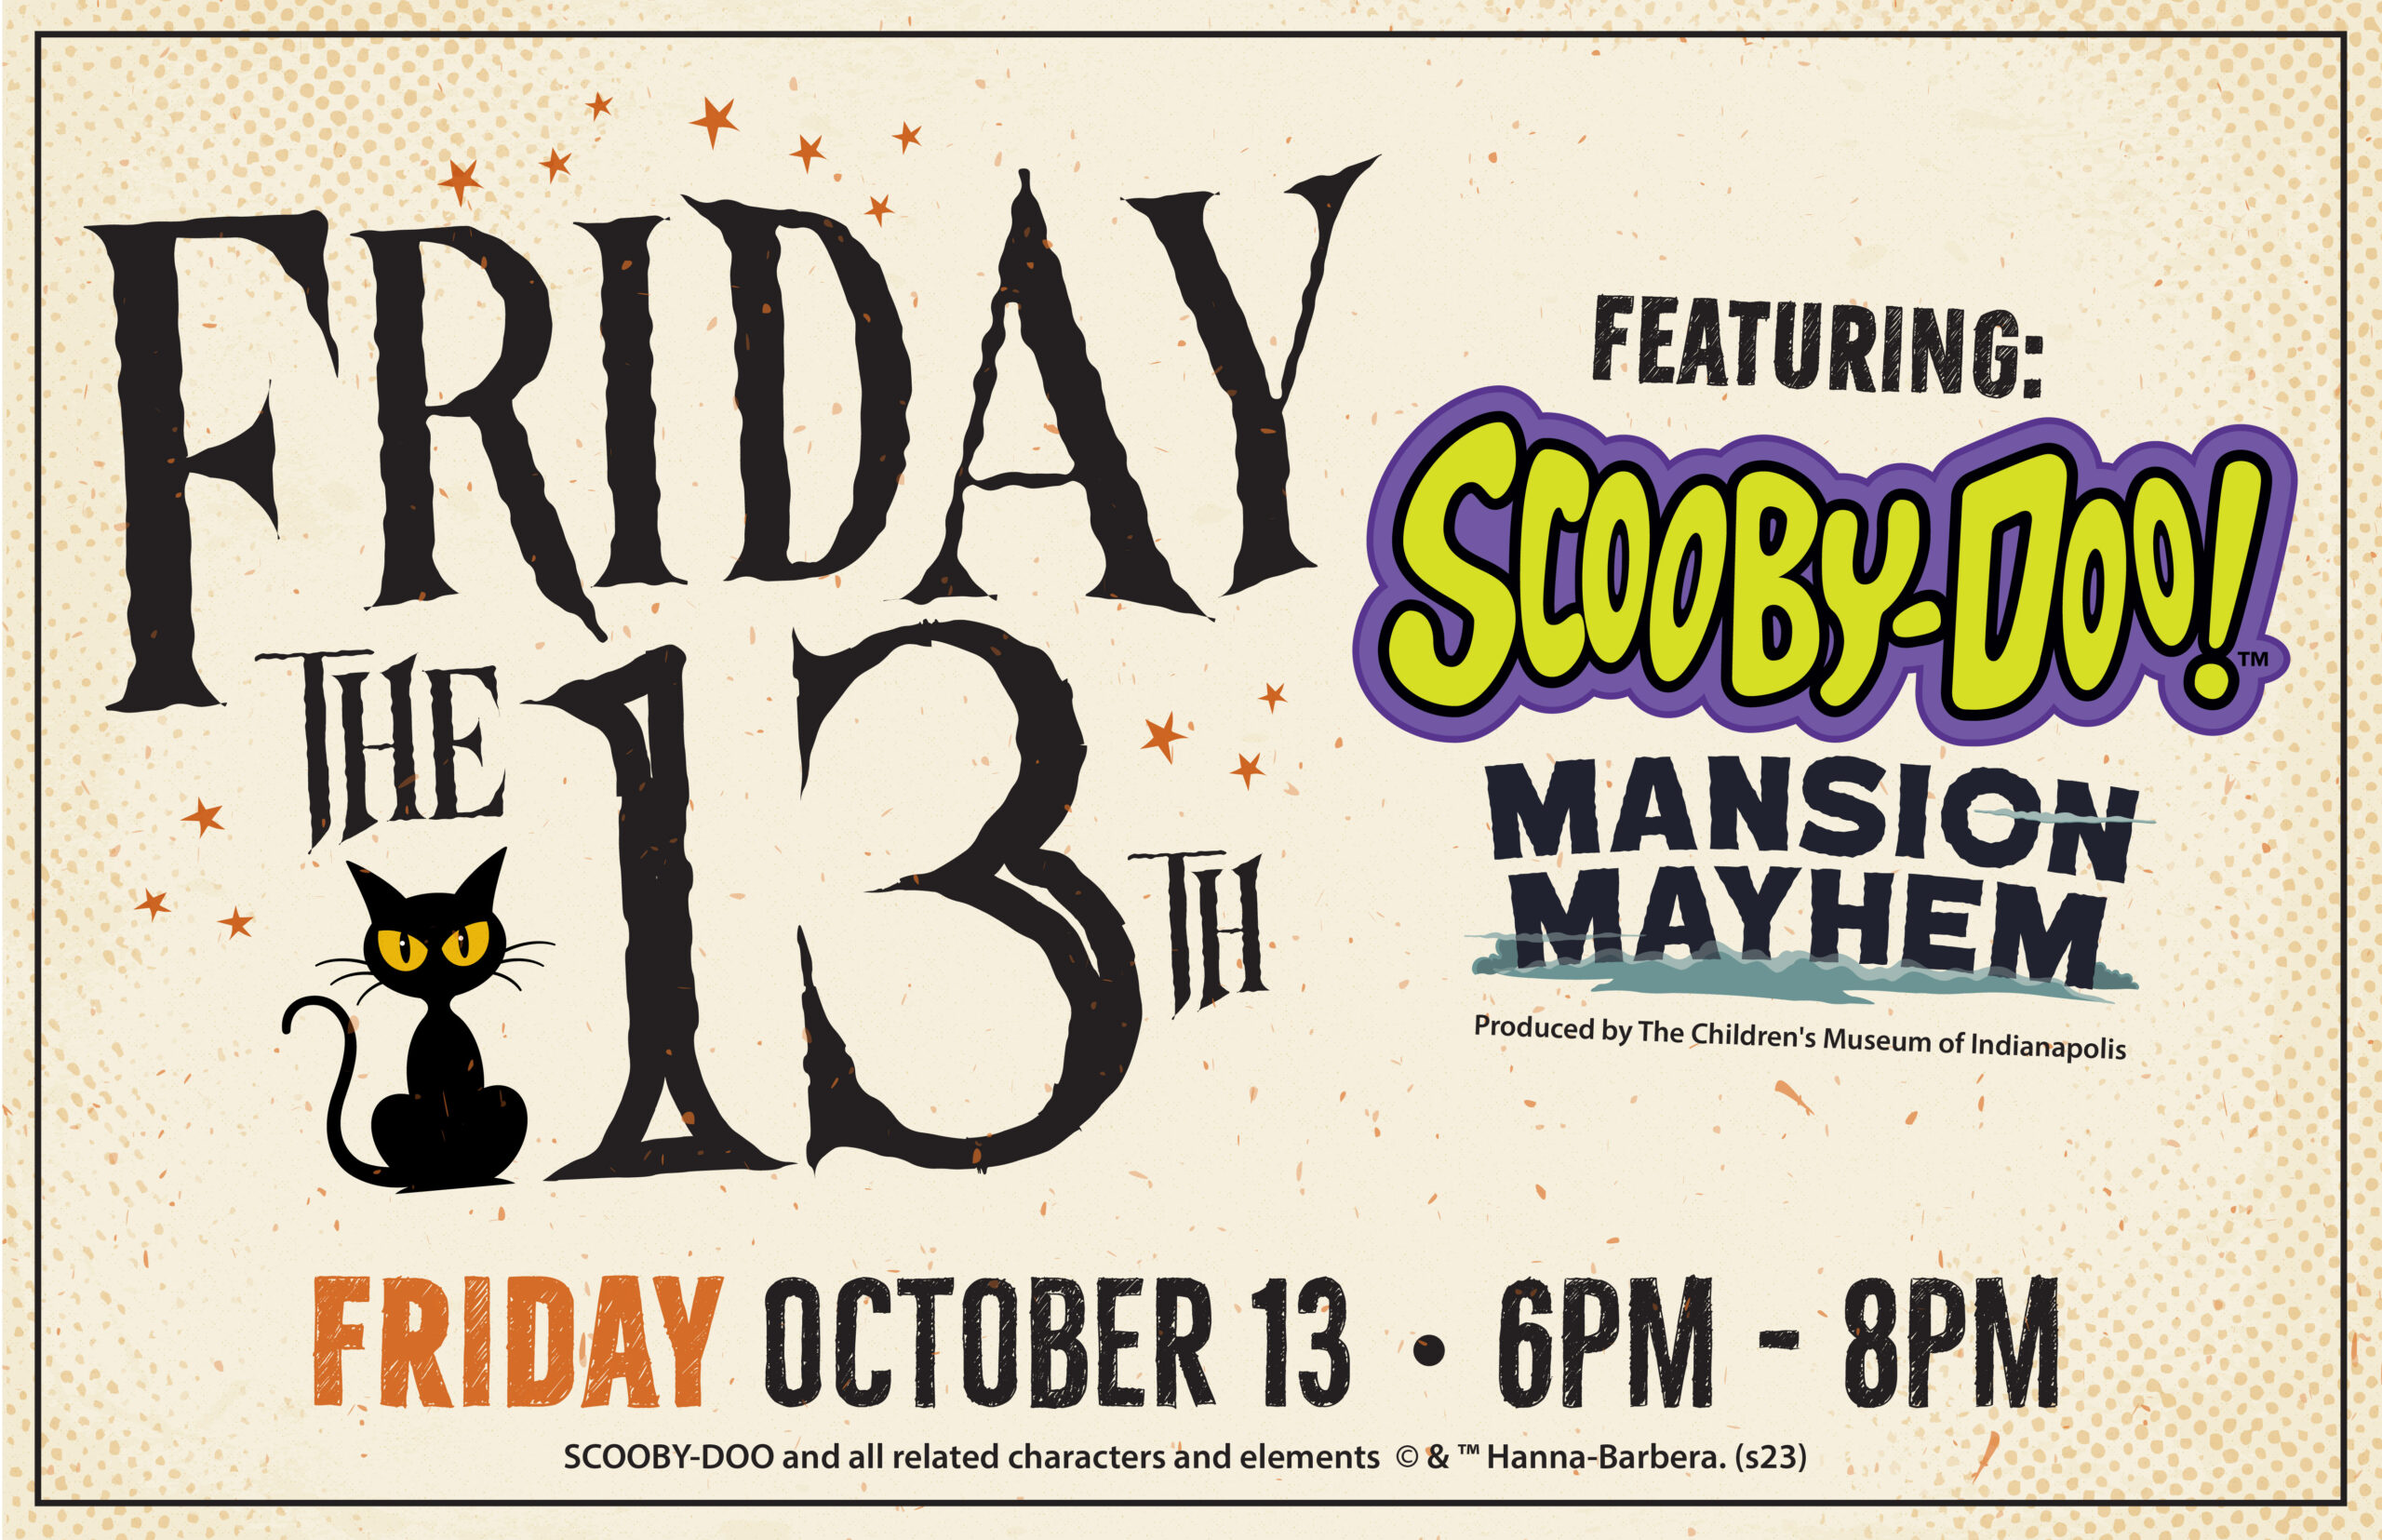 Friday the 13th Featuring SCOOBY-DOO!™ Mansion Mayhem